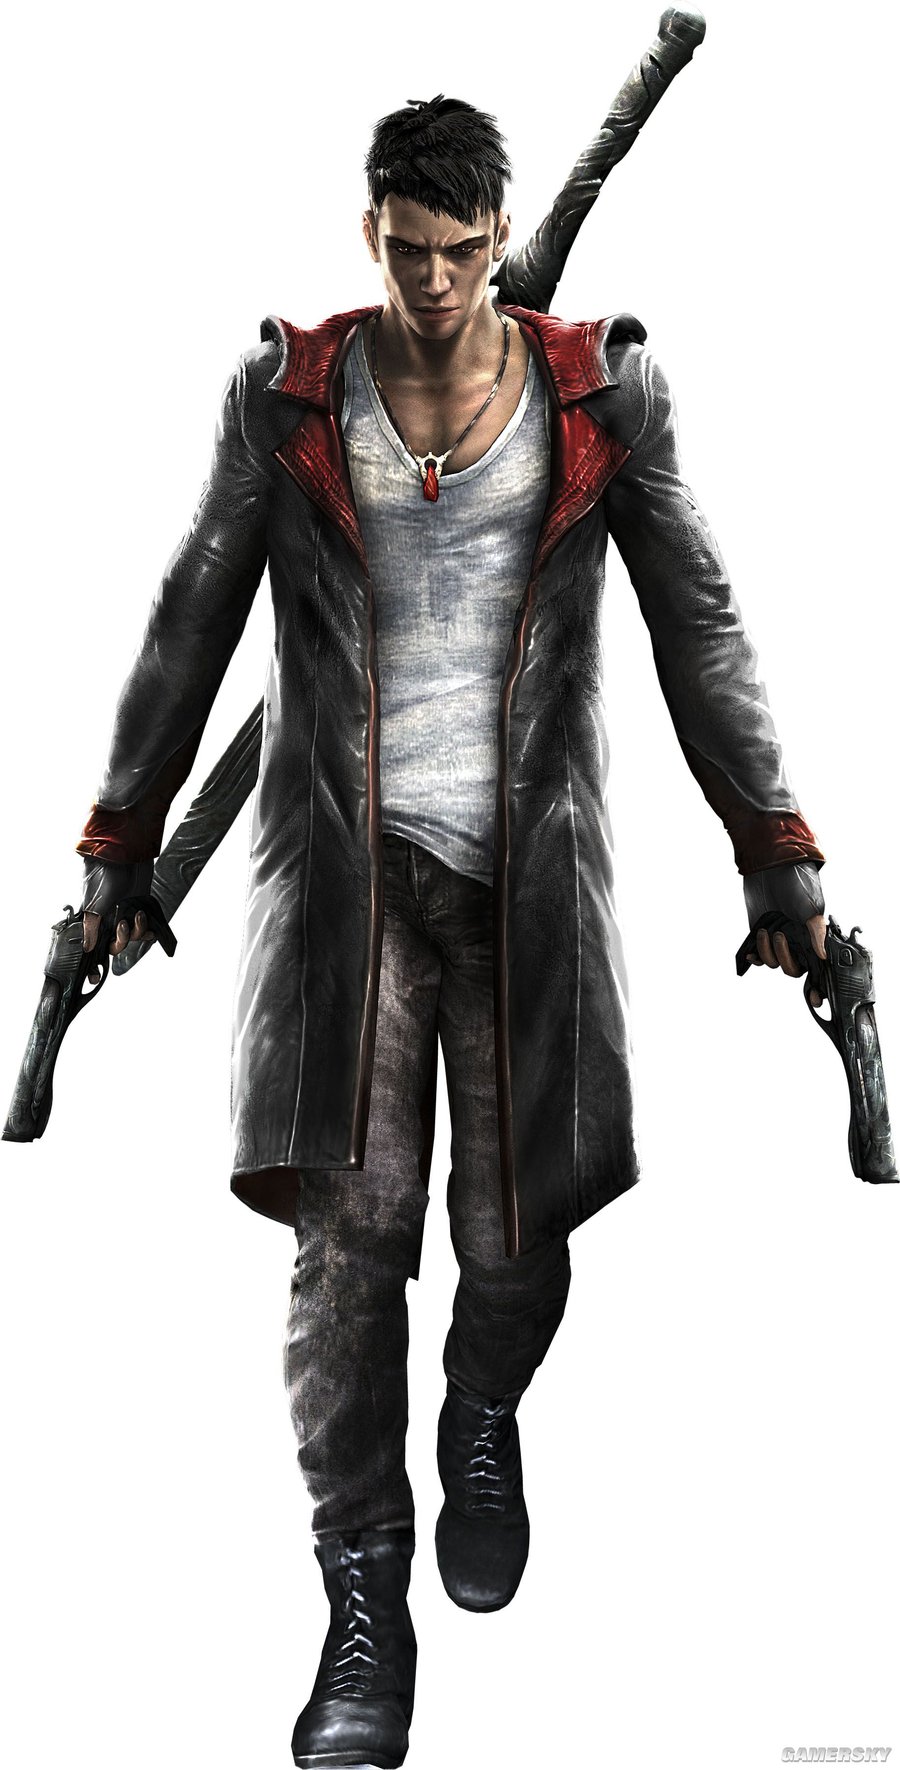 http://images5.fanpop.com/image/photos/31800000/Playstation-All-Stars-Royale-Dante-devil-may-cry-5-31827874-900-1770.jpg